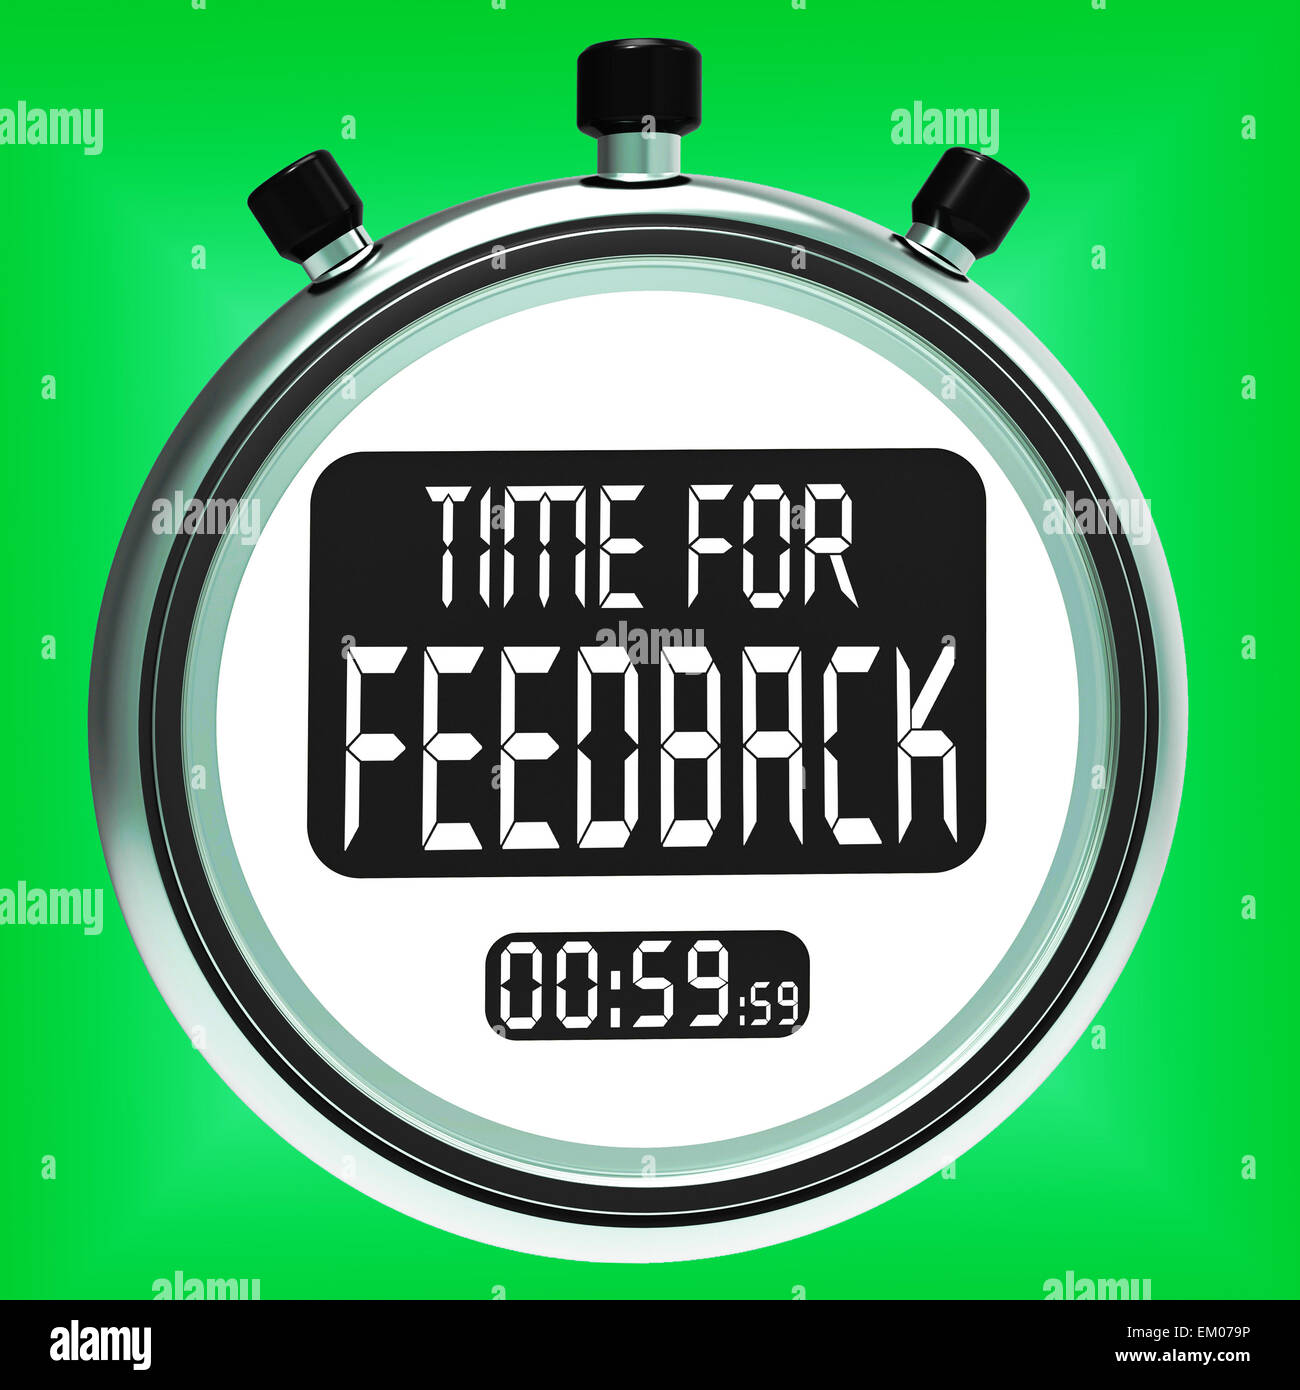 Time For feedback Meaning Opinion Evaluation And Surveys Stock Photo